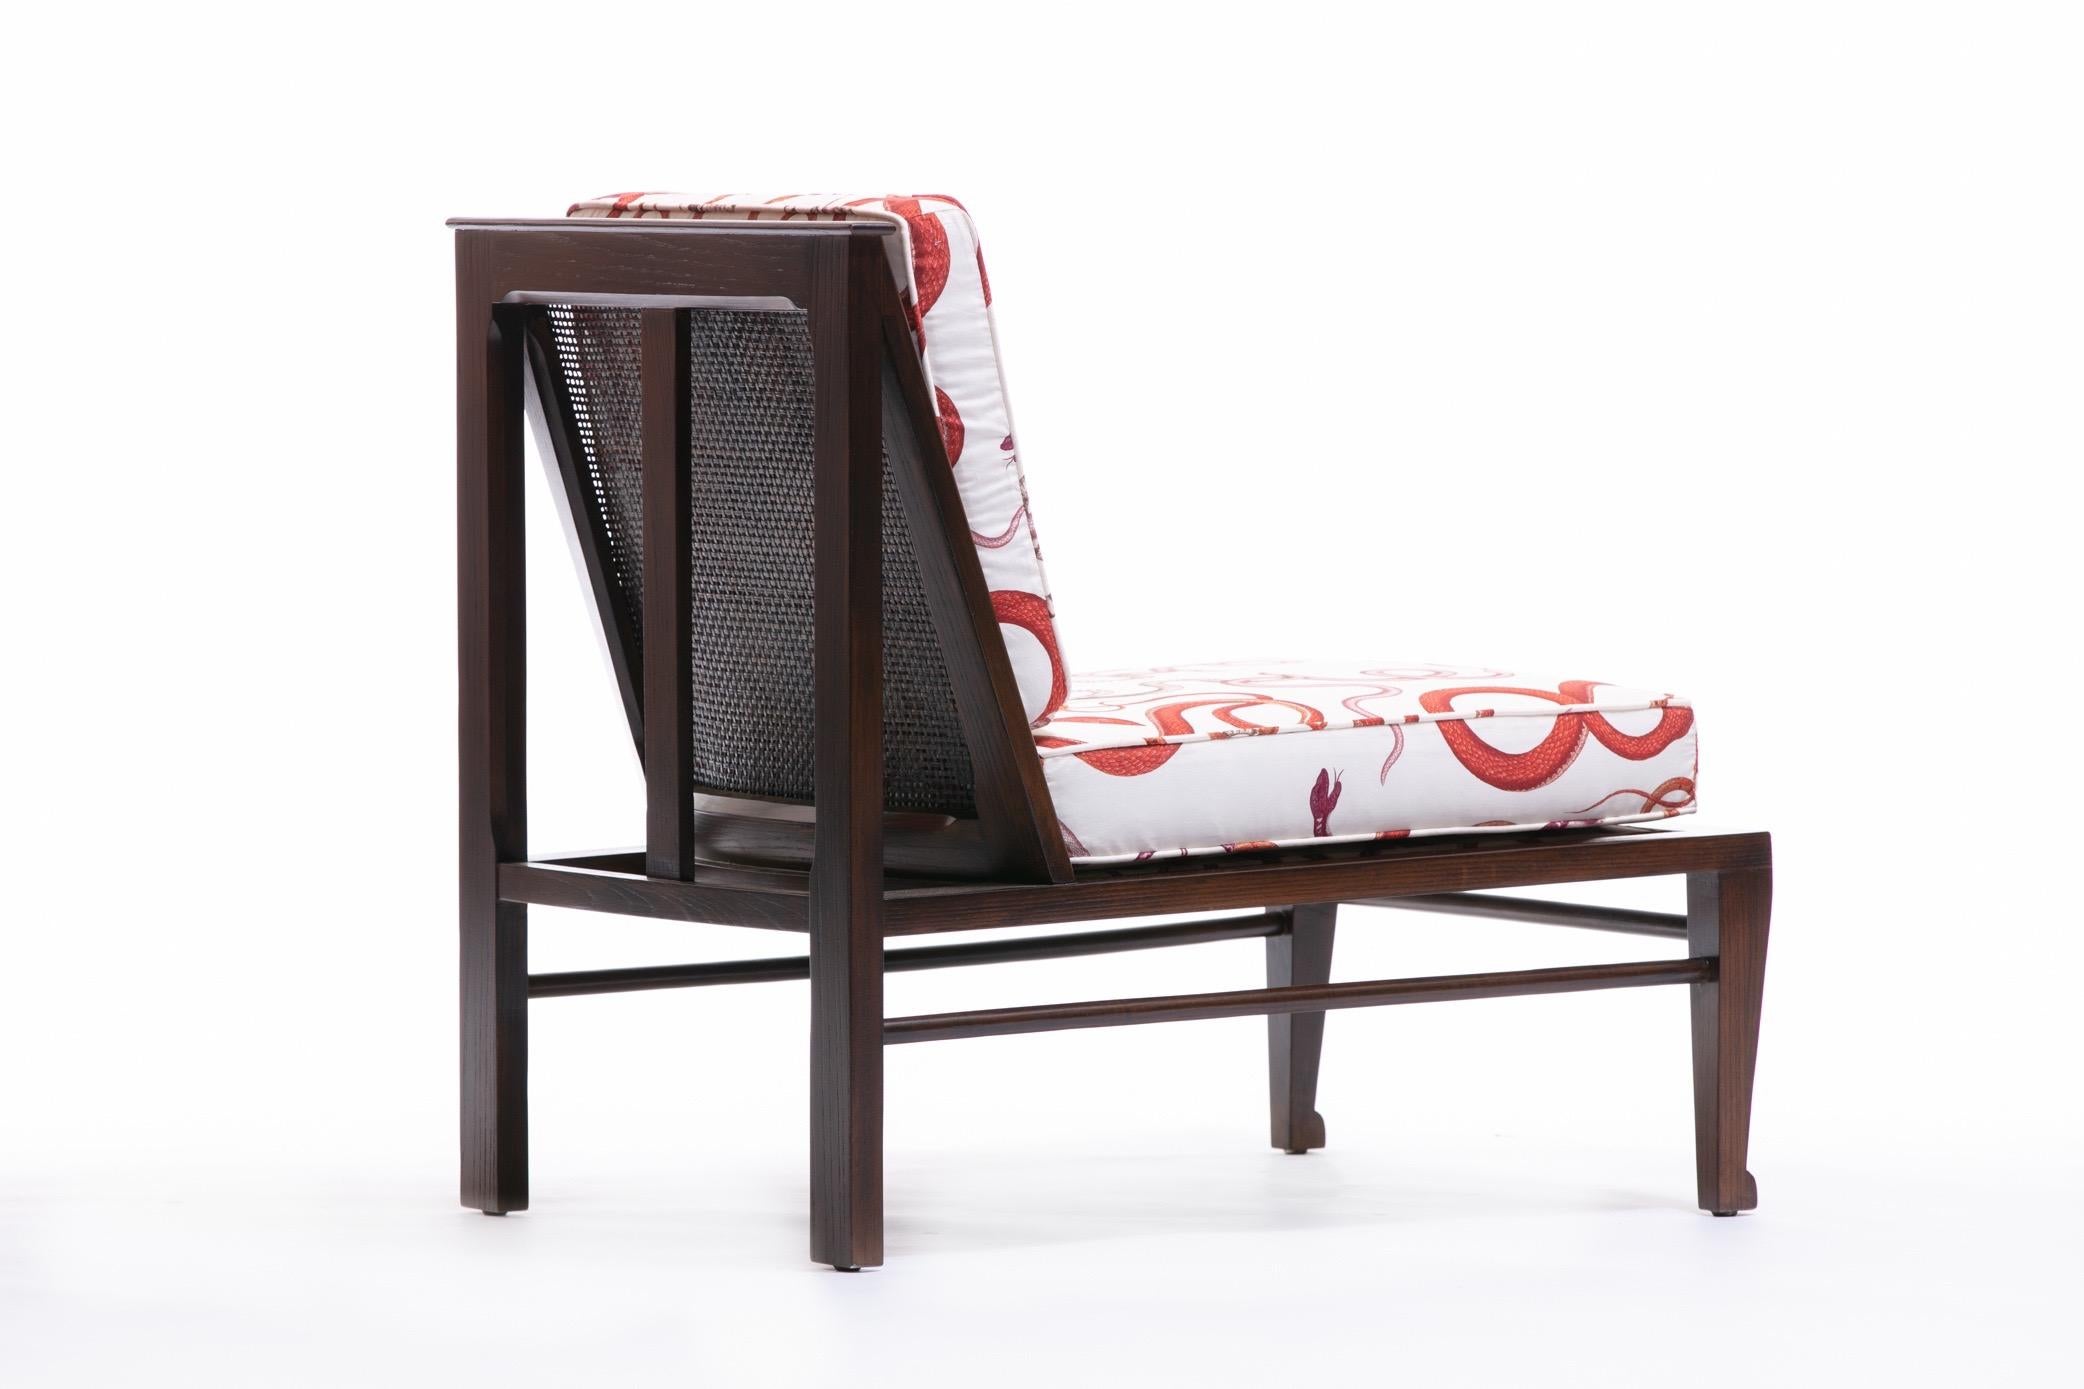 William Pahlmann Thebes Chairs with Snake Fabric, circa 1964 For Sale 3